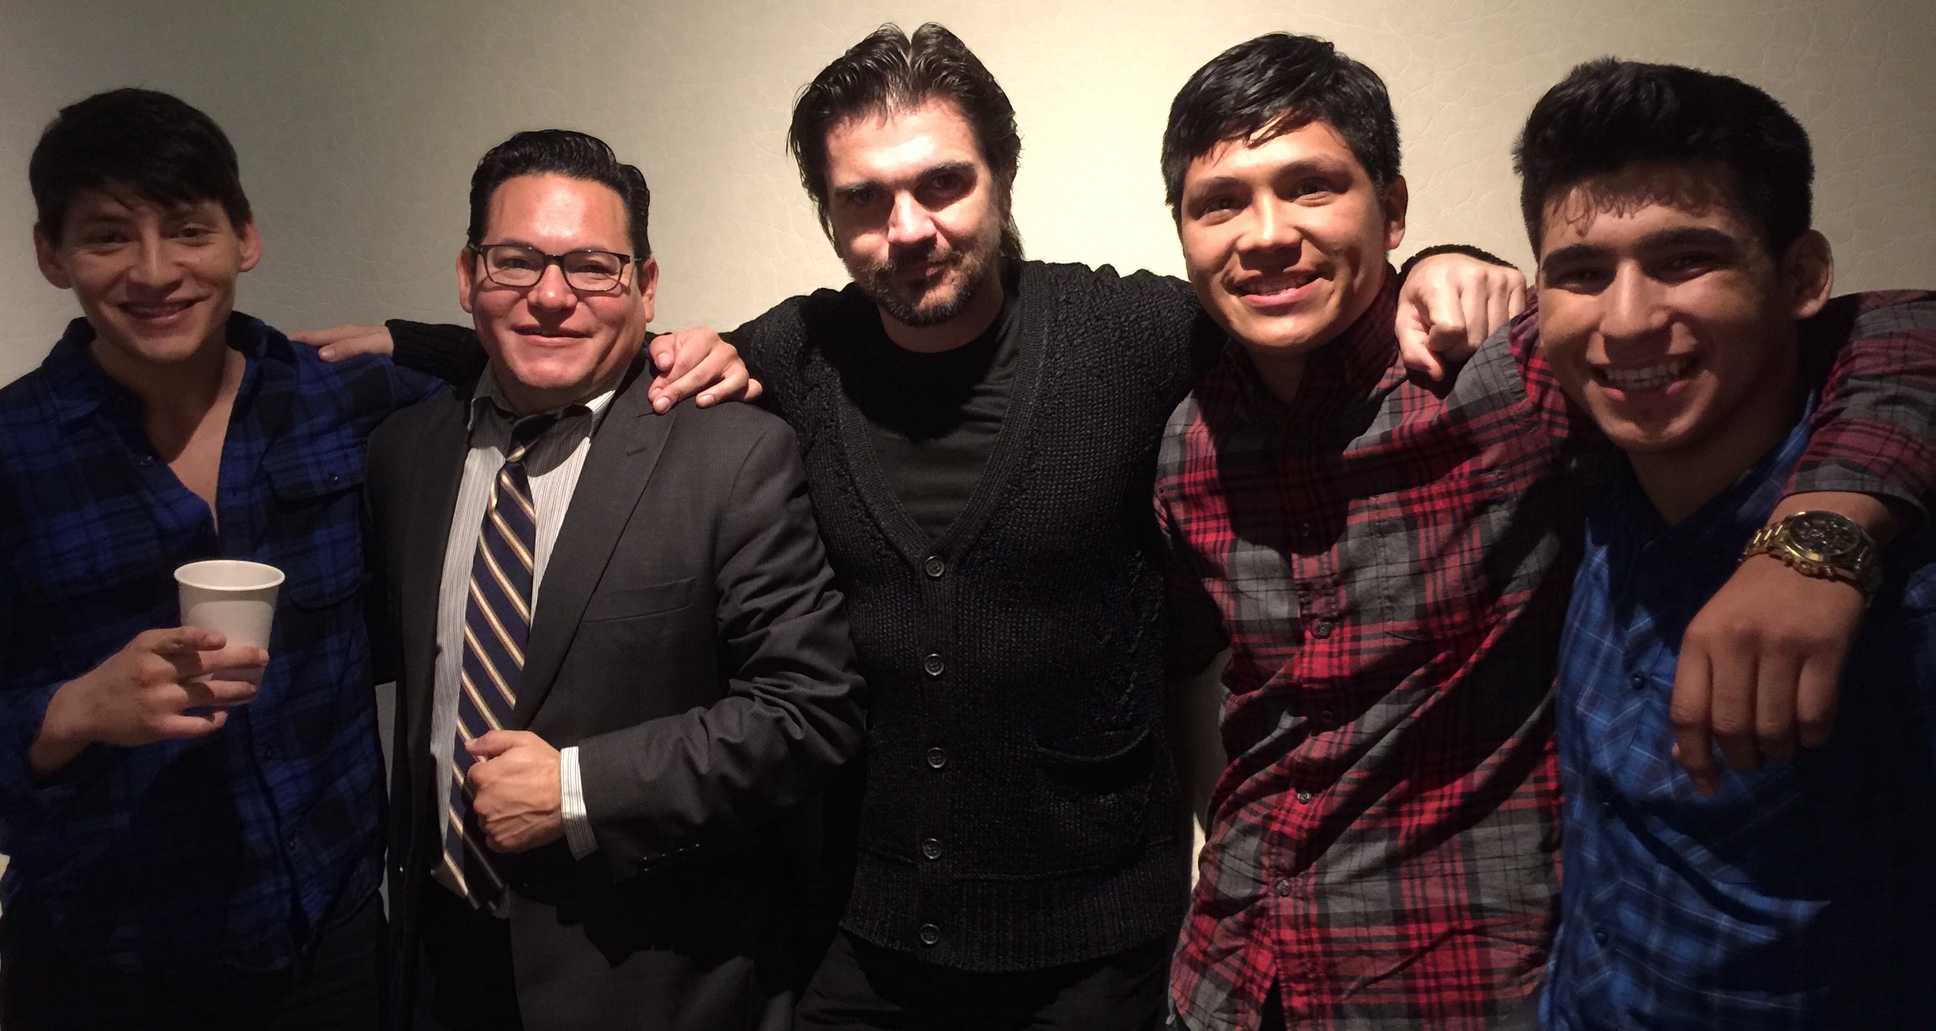 With Juanes and the cast of McFarland USA